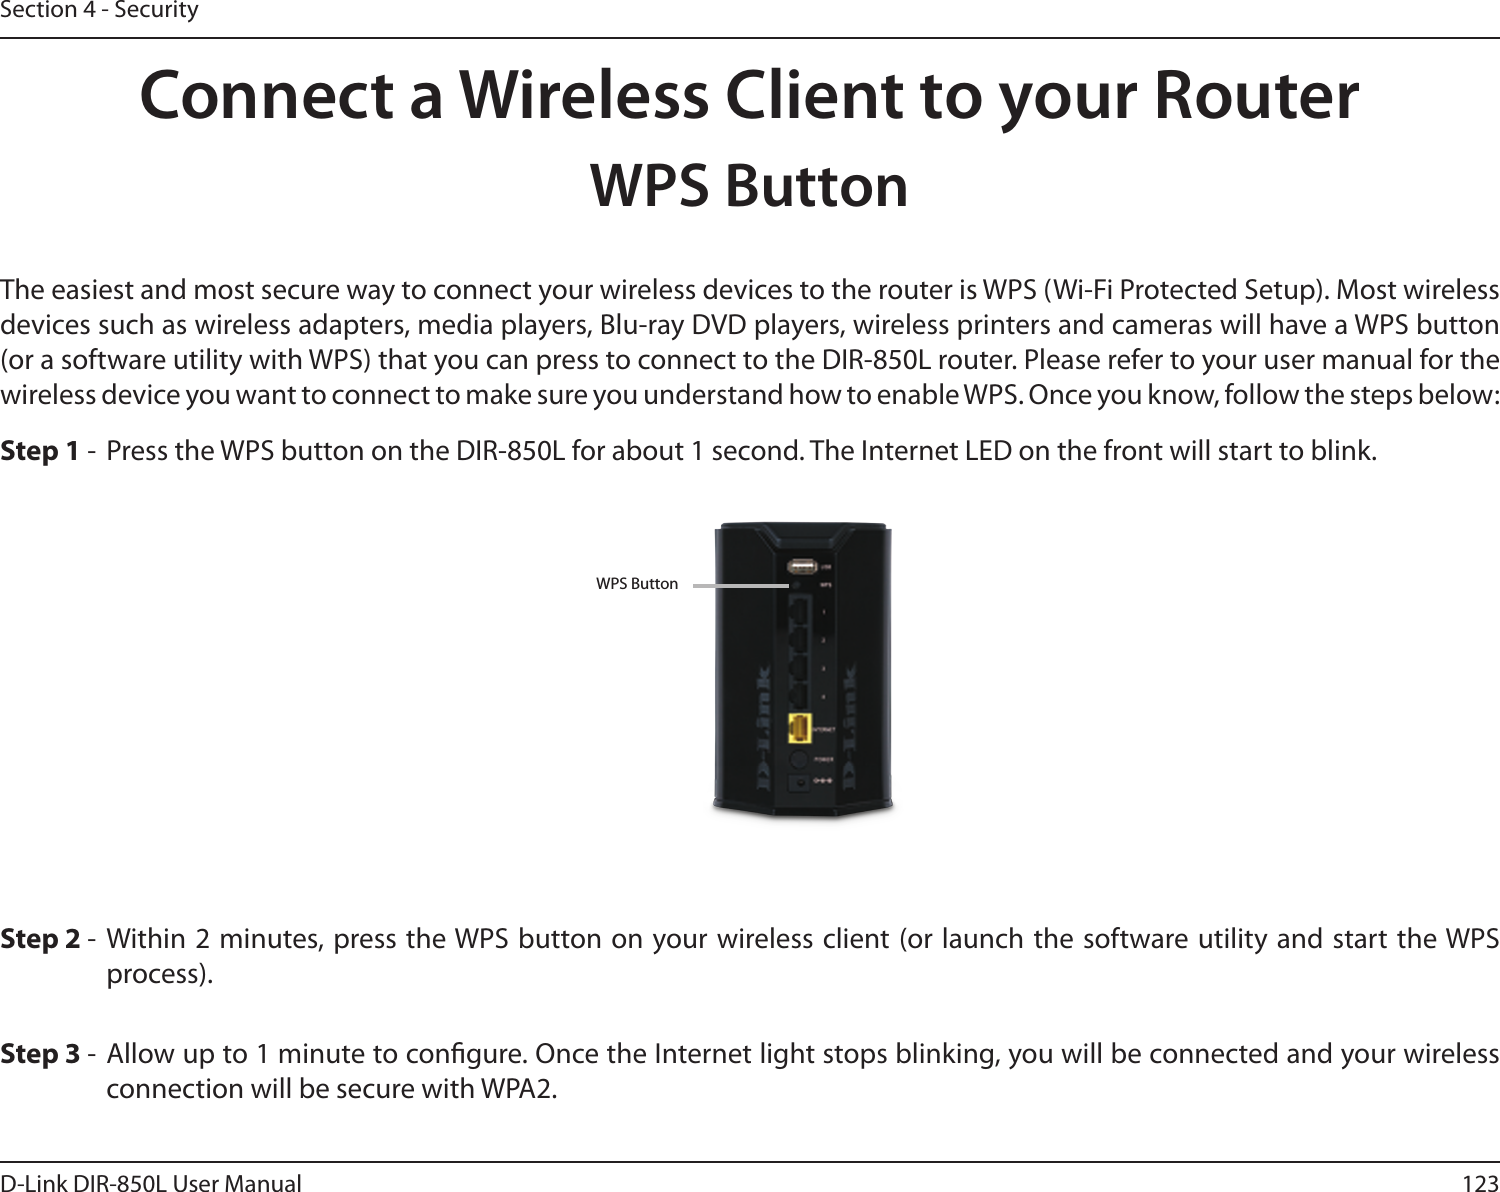 123D-Link DIR-850L User ManualSection 4 - SecurityConnect a Wireless Client to your RouterWPS ButtonStep 2 -  Within 2 minutes, press the WPS button on your wireless client (or launch the software utility and start the WPS process).The easiest and most secure way to connect your wireless devices to the router is WPS (Wi-Fi Protected Setup). Most wireless devices such as wireless adapters, media players, Blu-ray DVD players, wireless printers and cameras will have a WPS button (or a software utility with WPS) that you can press to connect to the DIR-850L router. Please refer to your user manual for the wireless device you want to connect to make sure you understand how to enable WPS. Once you know, follow the steps below:Step 1 -  Press the WPS button on the DIR-850L for about 1 second. The Internet LED on the front will start to blink.Step 3 -  Allow up to 1 minute to congure. Once the Internet light stops blinking, you will be connected and your wireless connection will be secure with WPA2.WPS Button